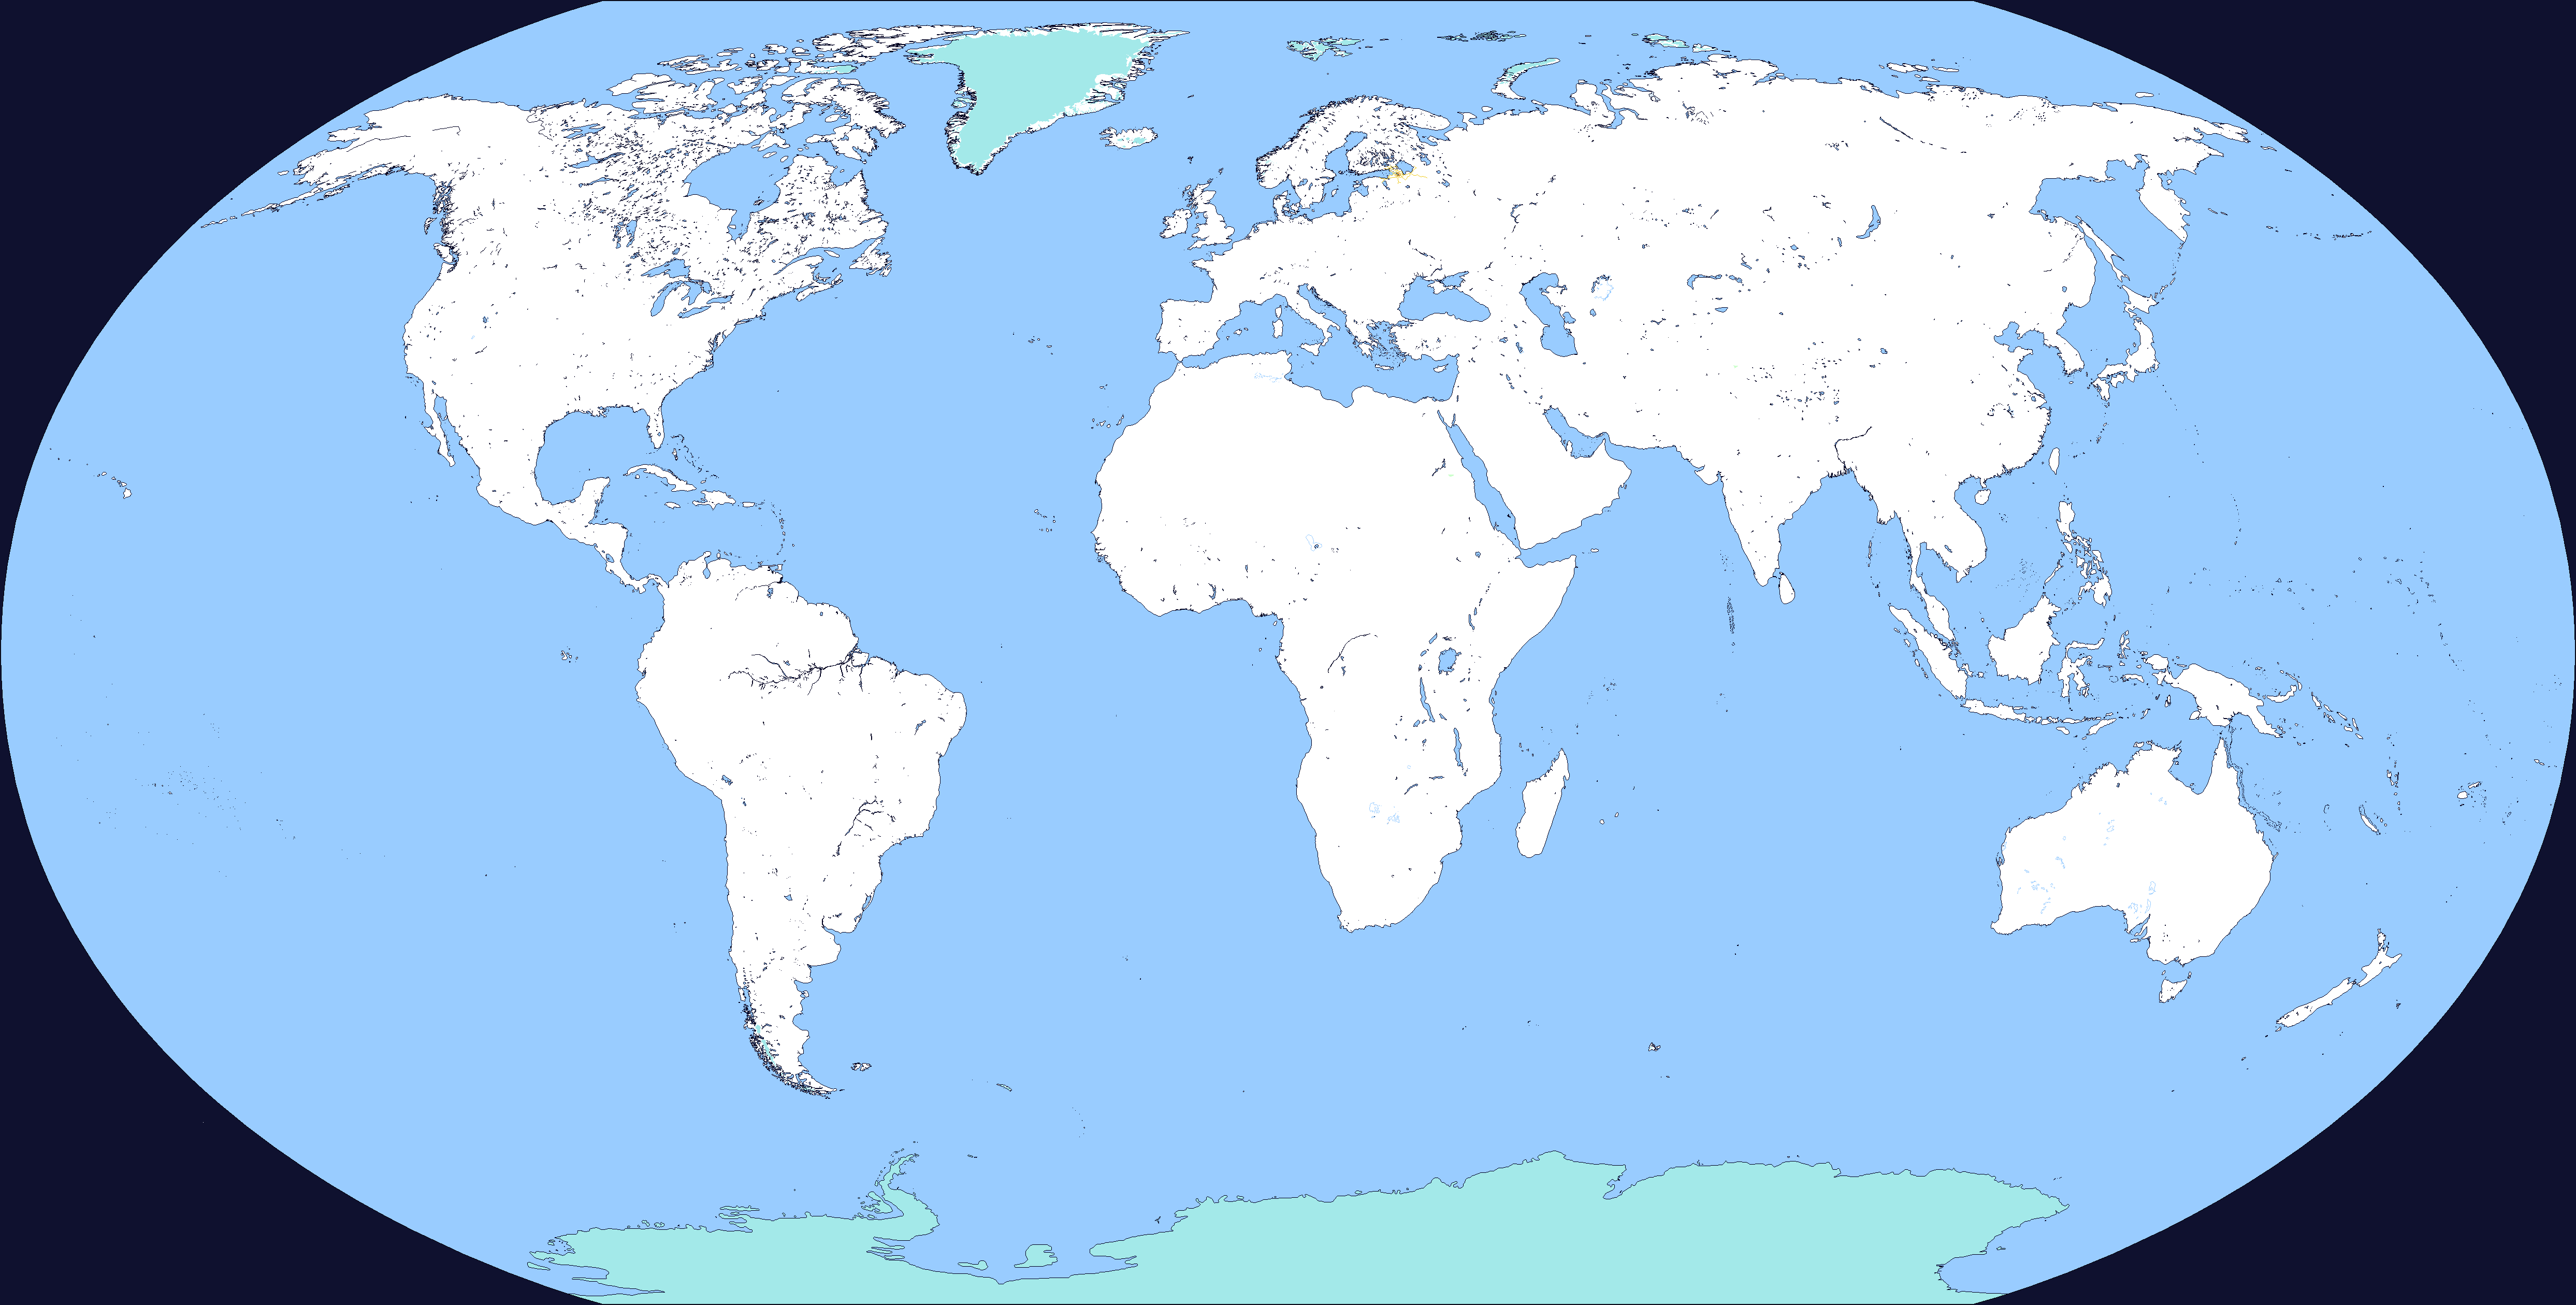 World Map - With Roads